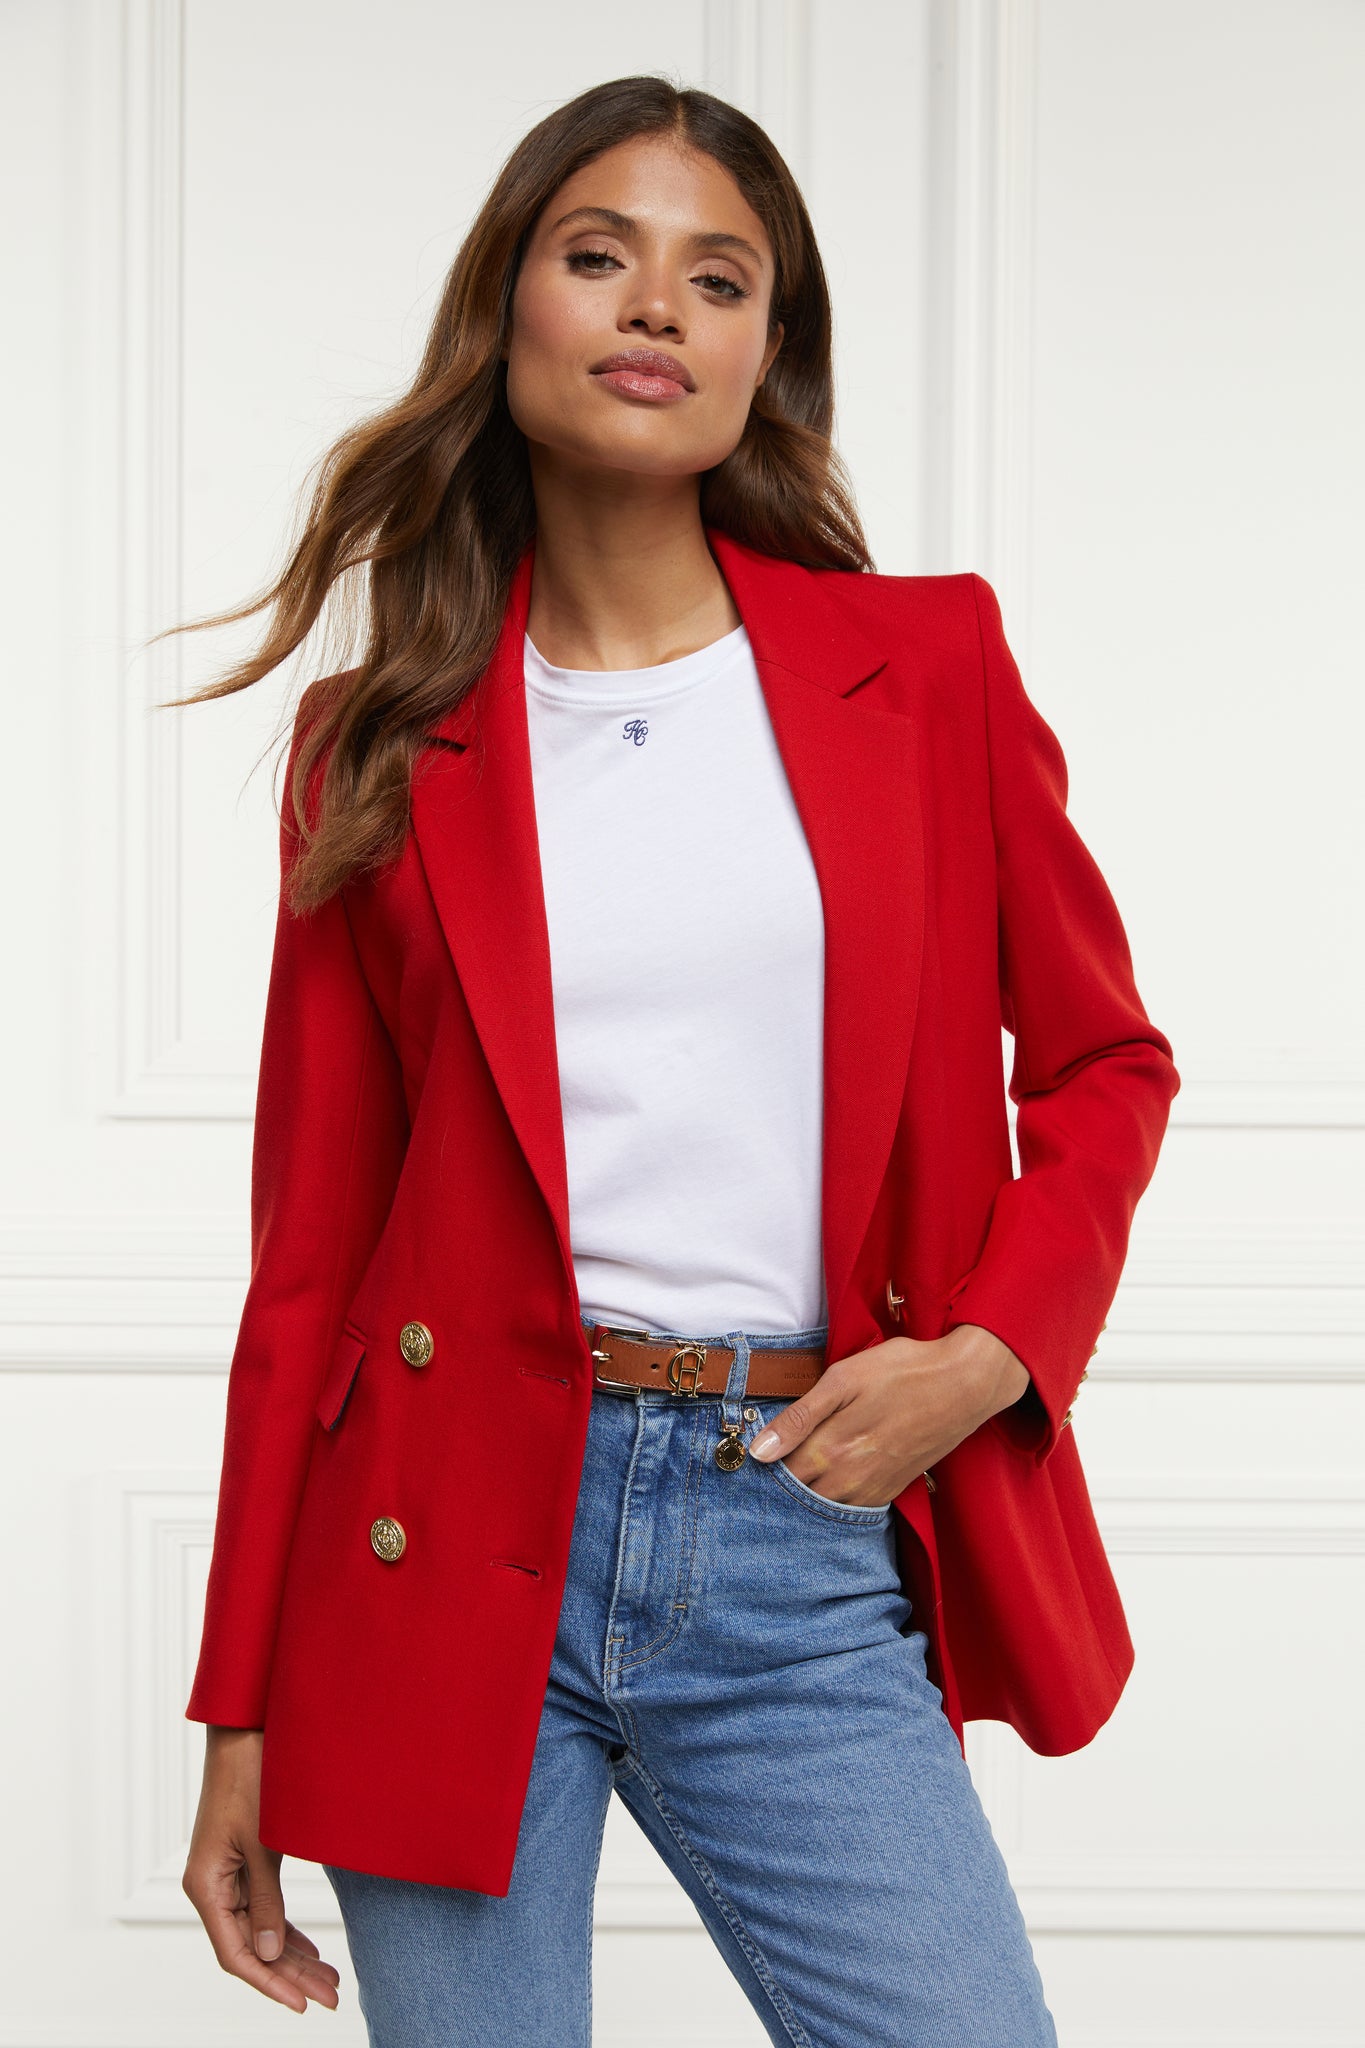 double breasted wool blazer in red barathea with two hip pockets and gold button details down front and on cuffs and handmade in the uk